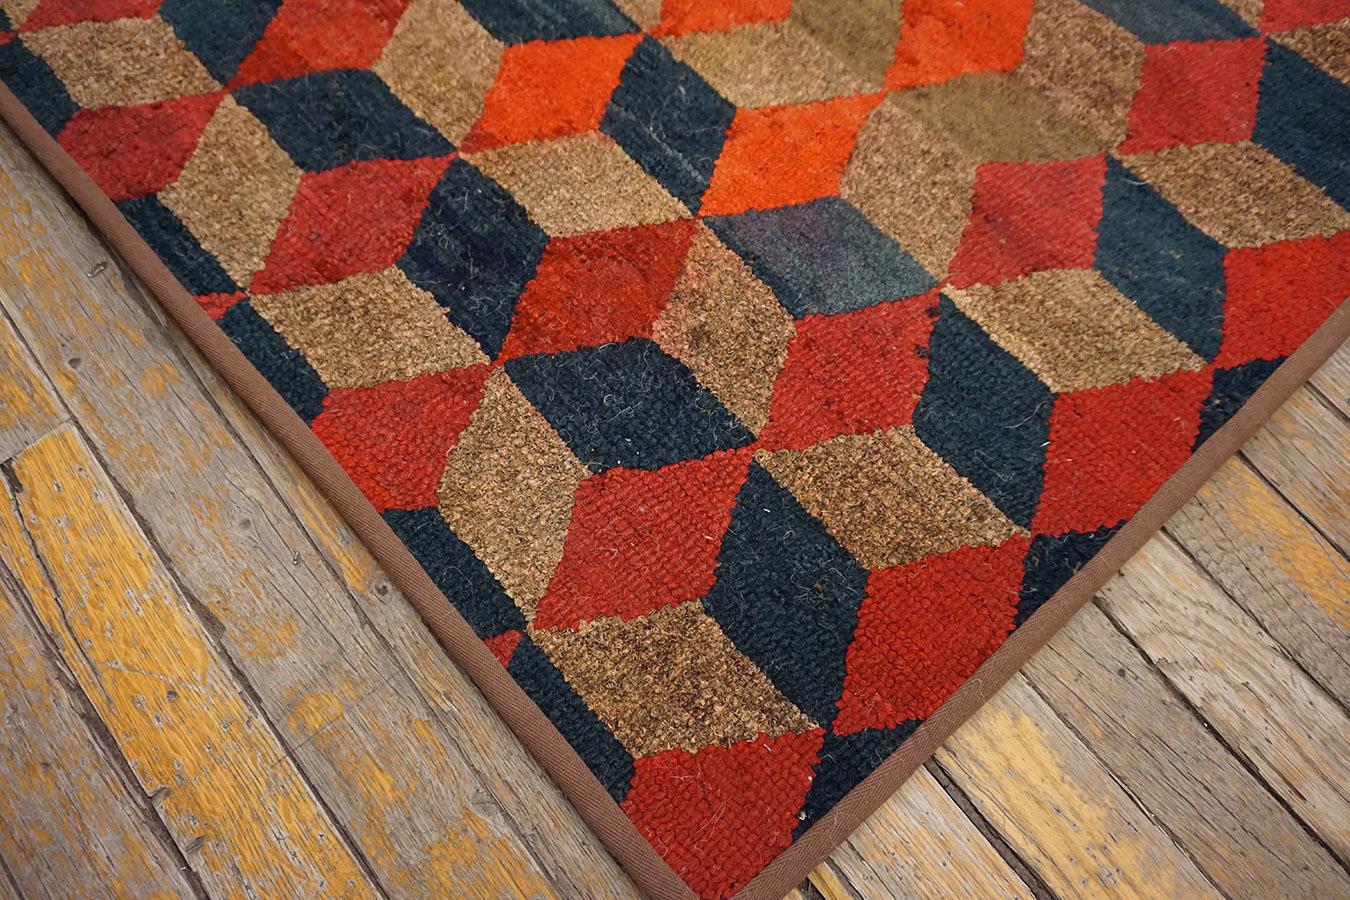 Folk Art Early 20th Century American Hooked Rug with Tumbling Block Pattern For Sale